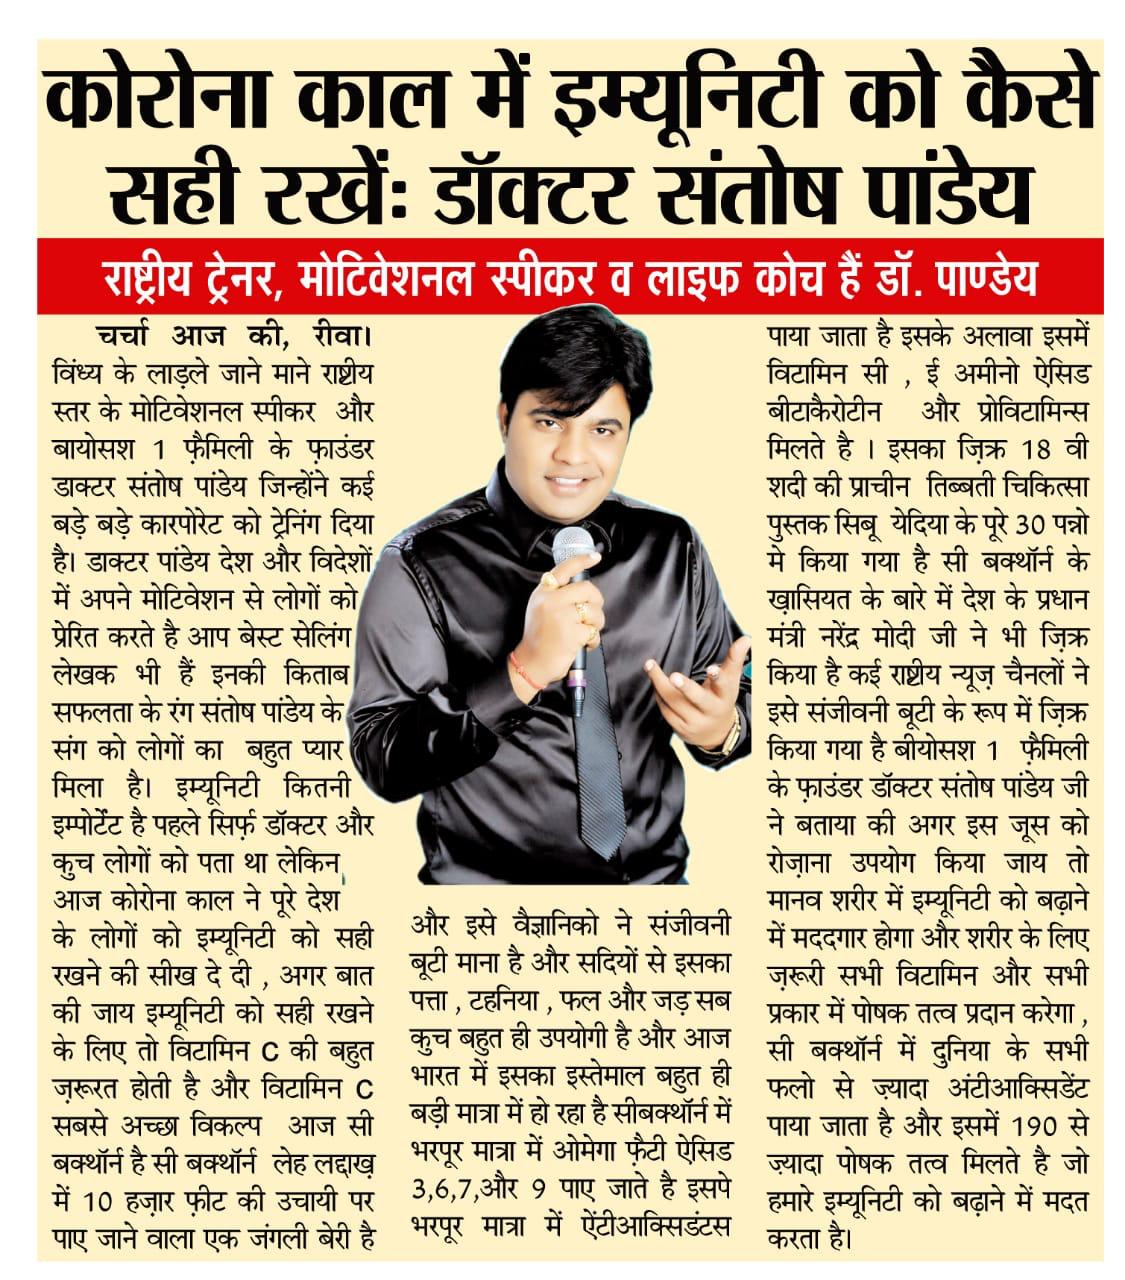 Article of Dr. Santosh Pandey on News paper